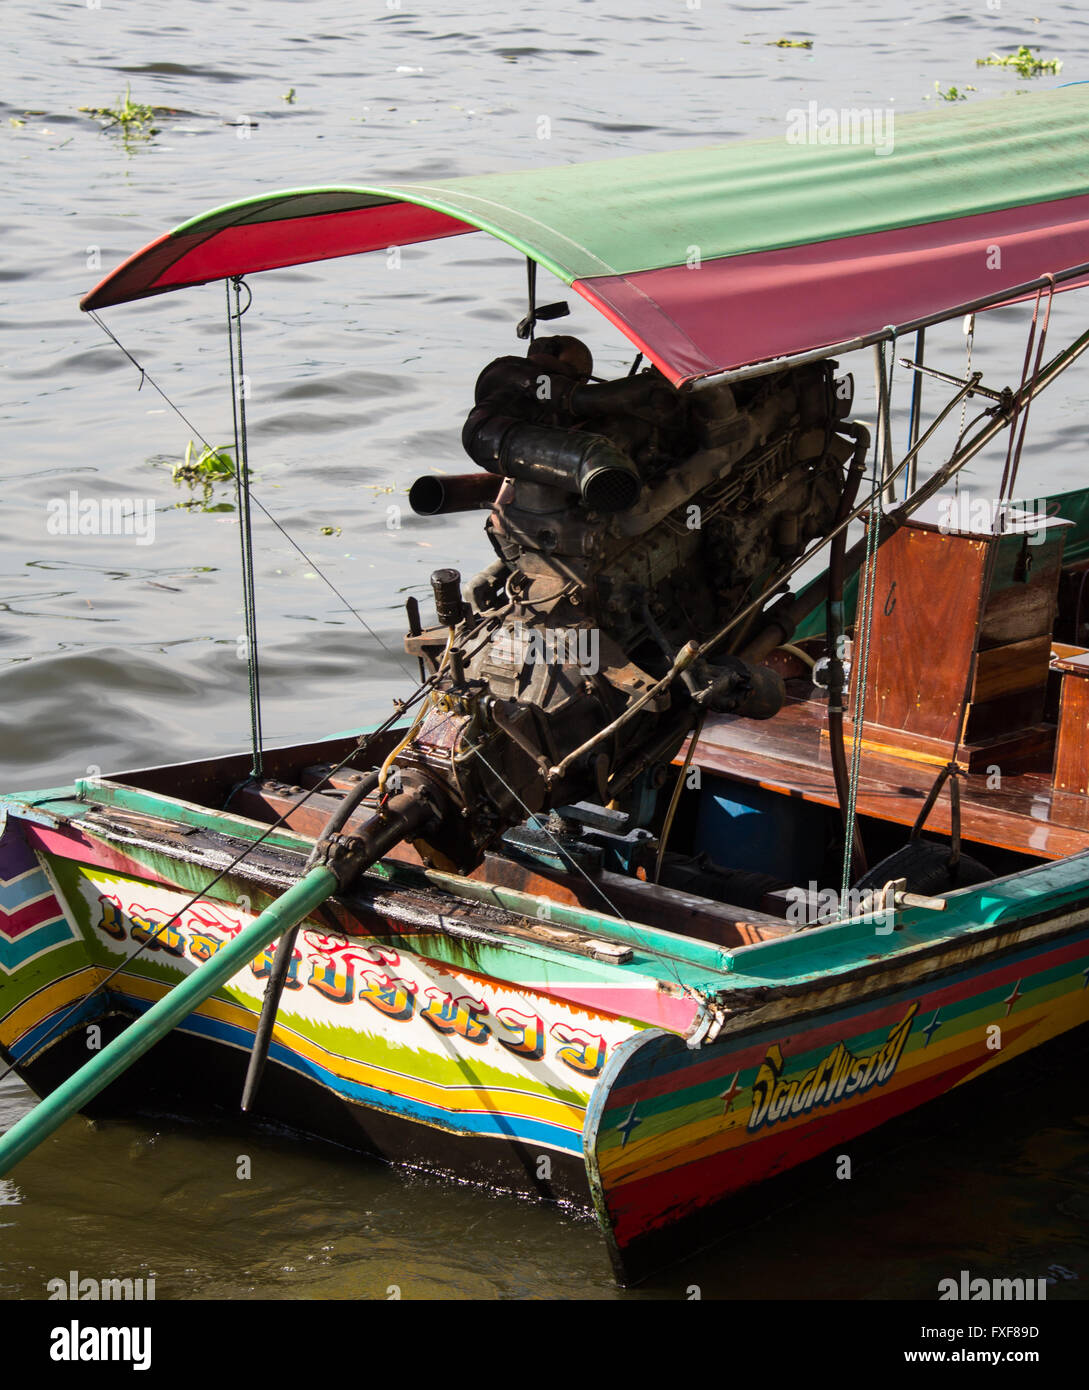 Big outboard diesel engine on a small tourist transportation boat in Bangkok, Thailand, Asia. Stock Photo